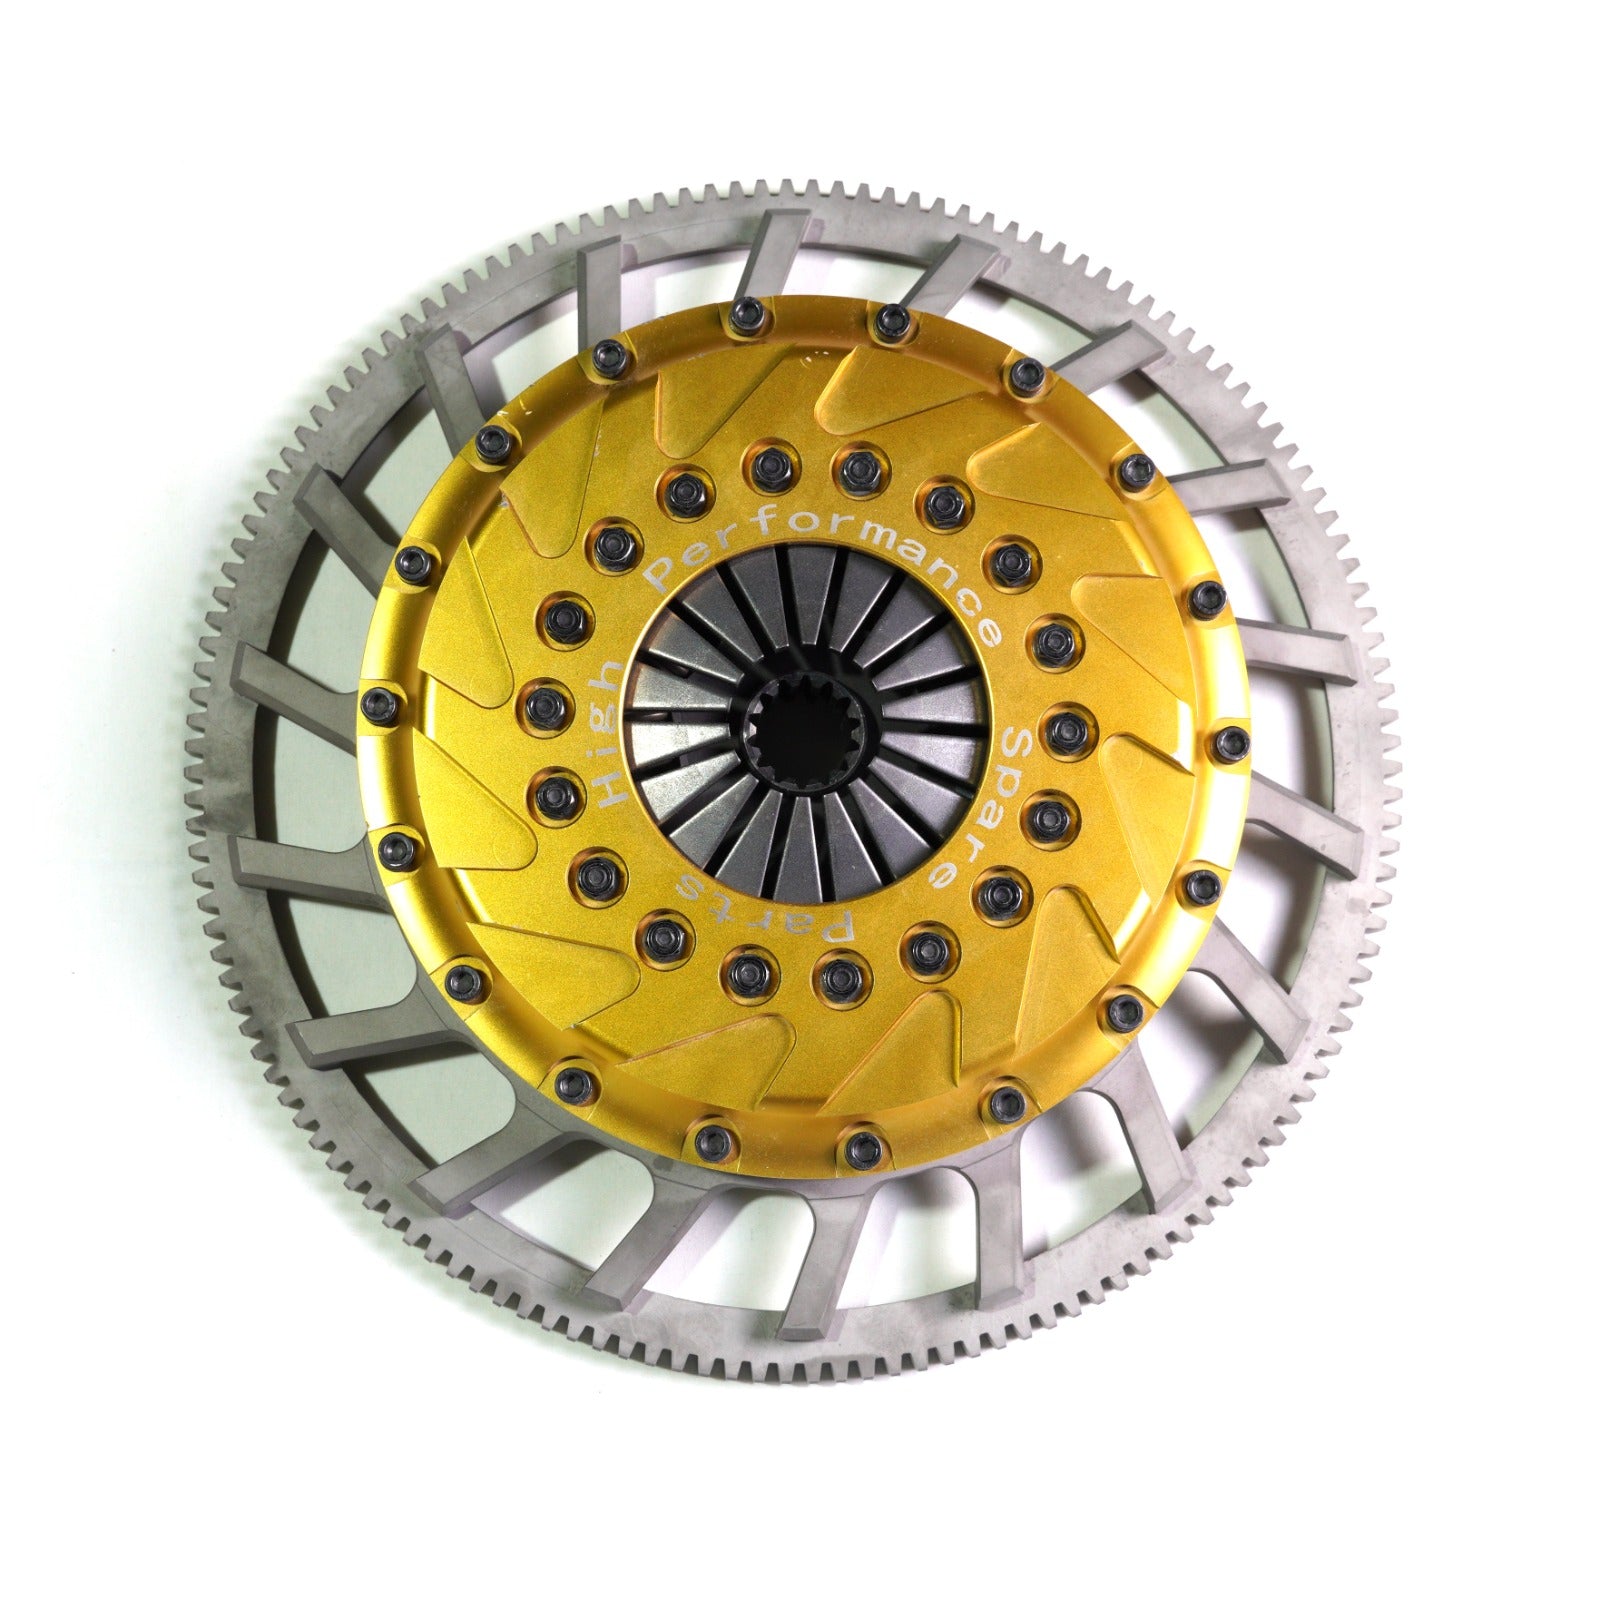 Aftermarket Clutch Kits: What You Need to Know -  Motors Blog